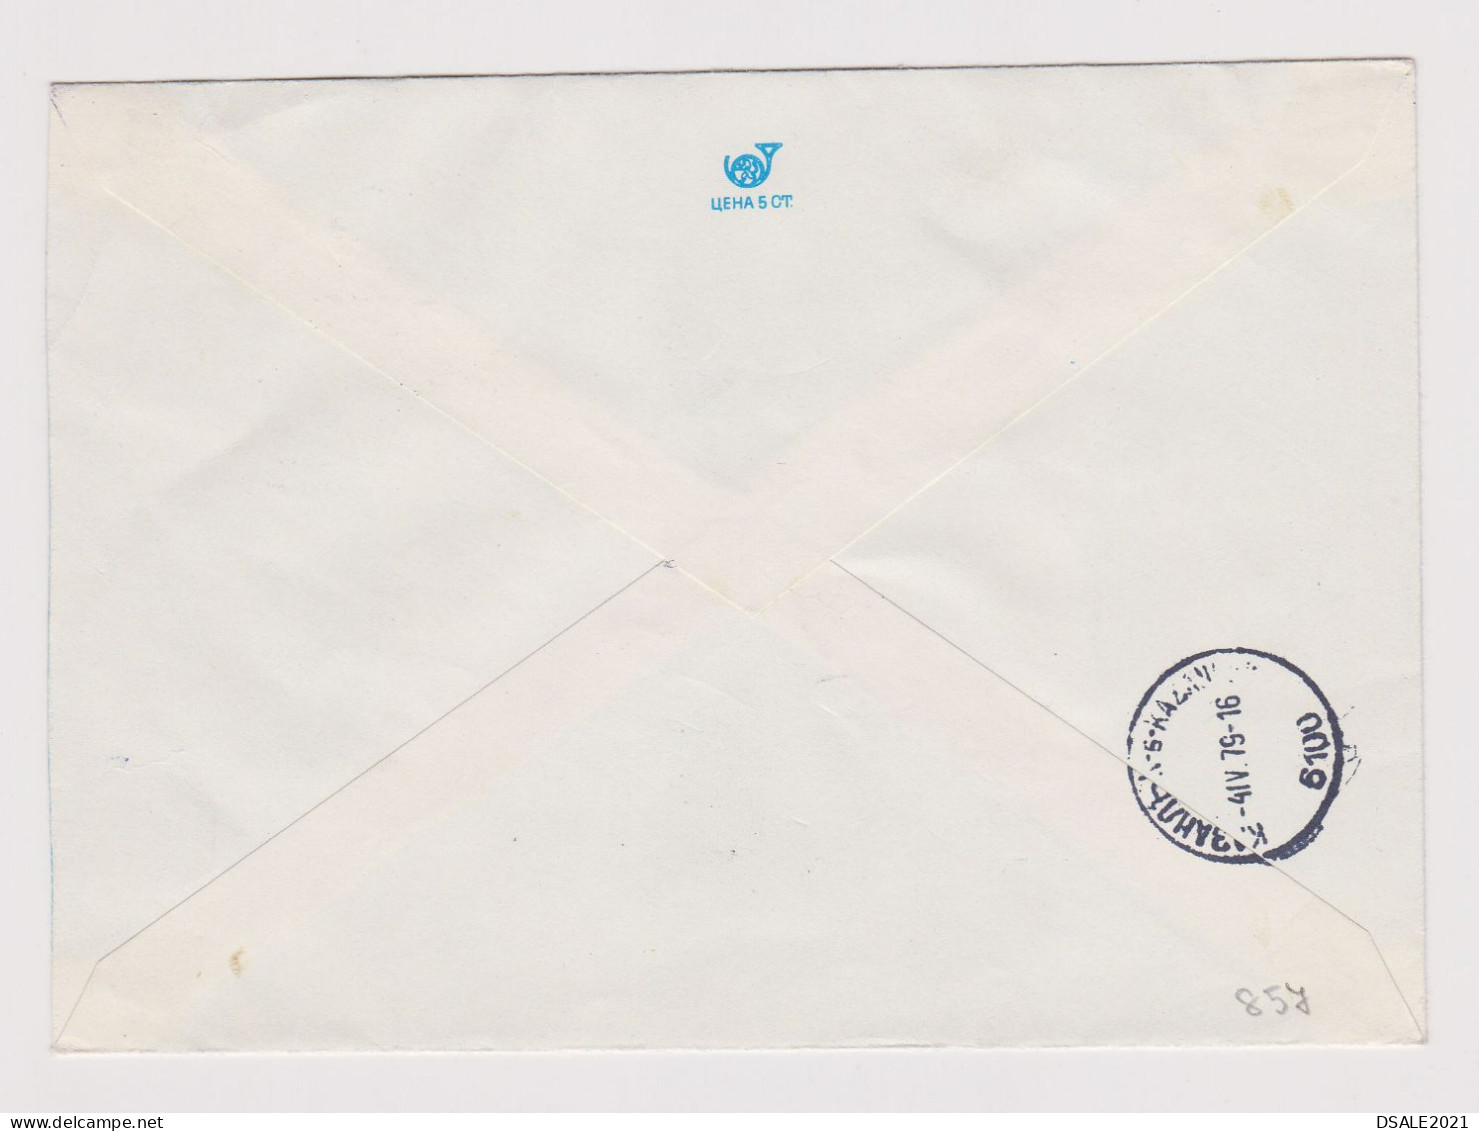 Bulgaria Bulgarien 1979 Ganzsachen R-Brief, Postal Stationery Cover, Registered W/Topic Stamps Flower, Architecture /857 - Briefe